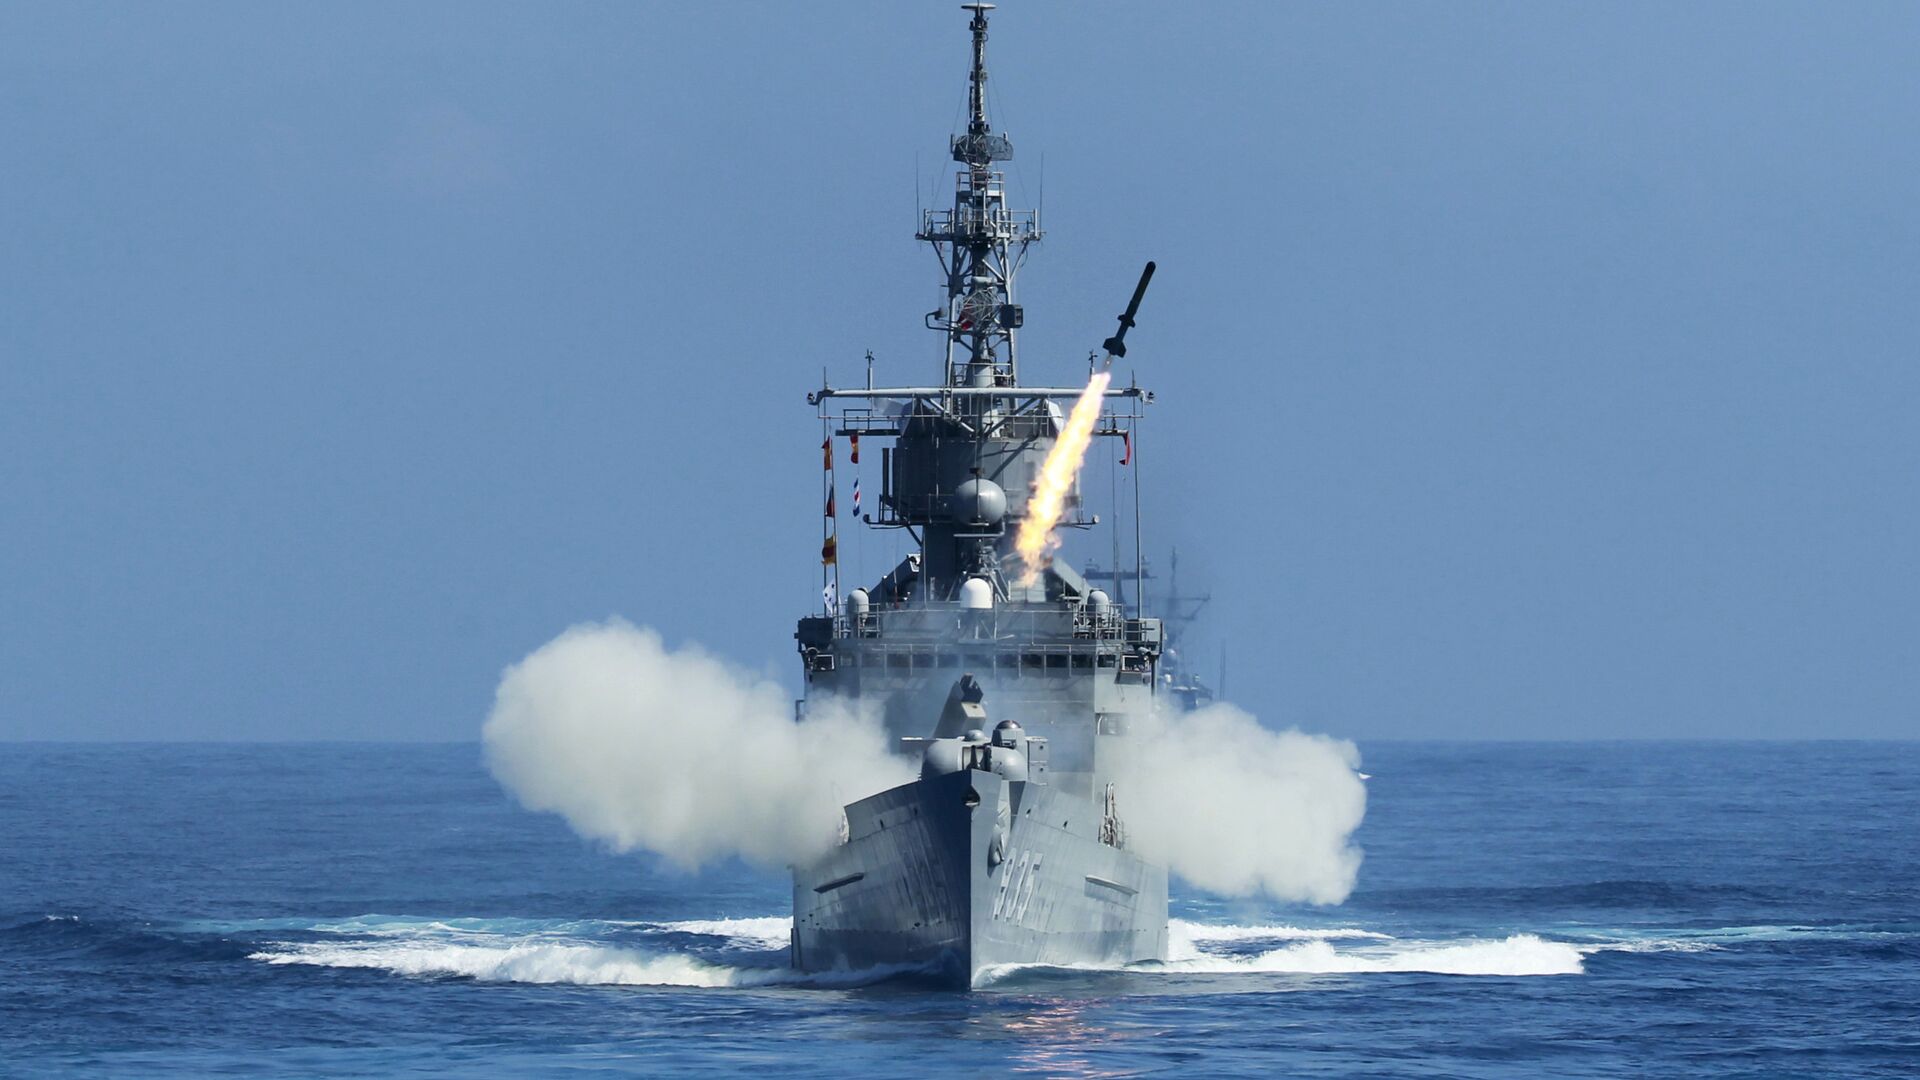 Taiwan Navy's Perry-class frigate launches an ASROC (anti-submarine rocket) during the annual Han Kuang military exercises. - Sputnik International, 1920, 09.06.2022